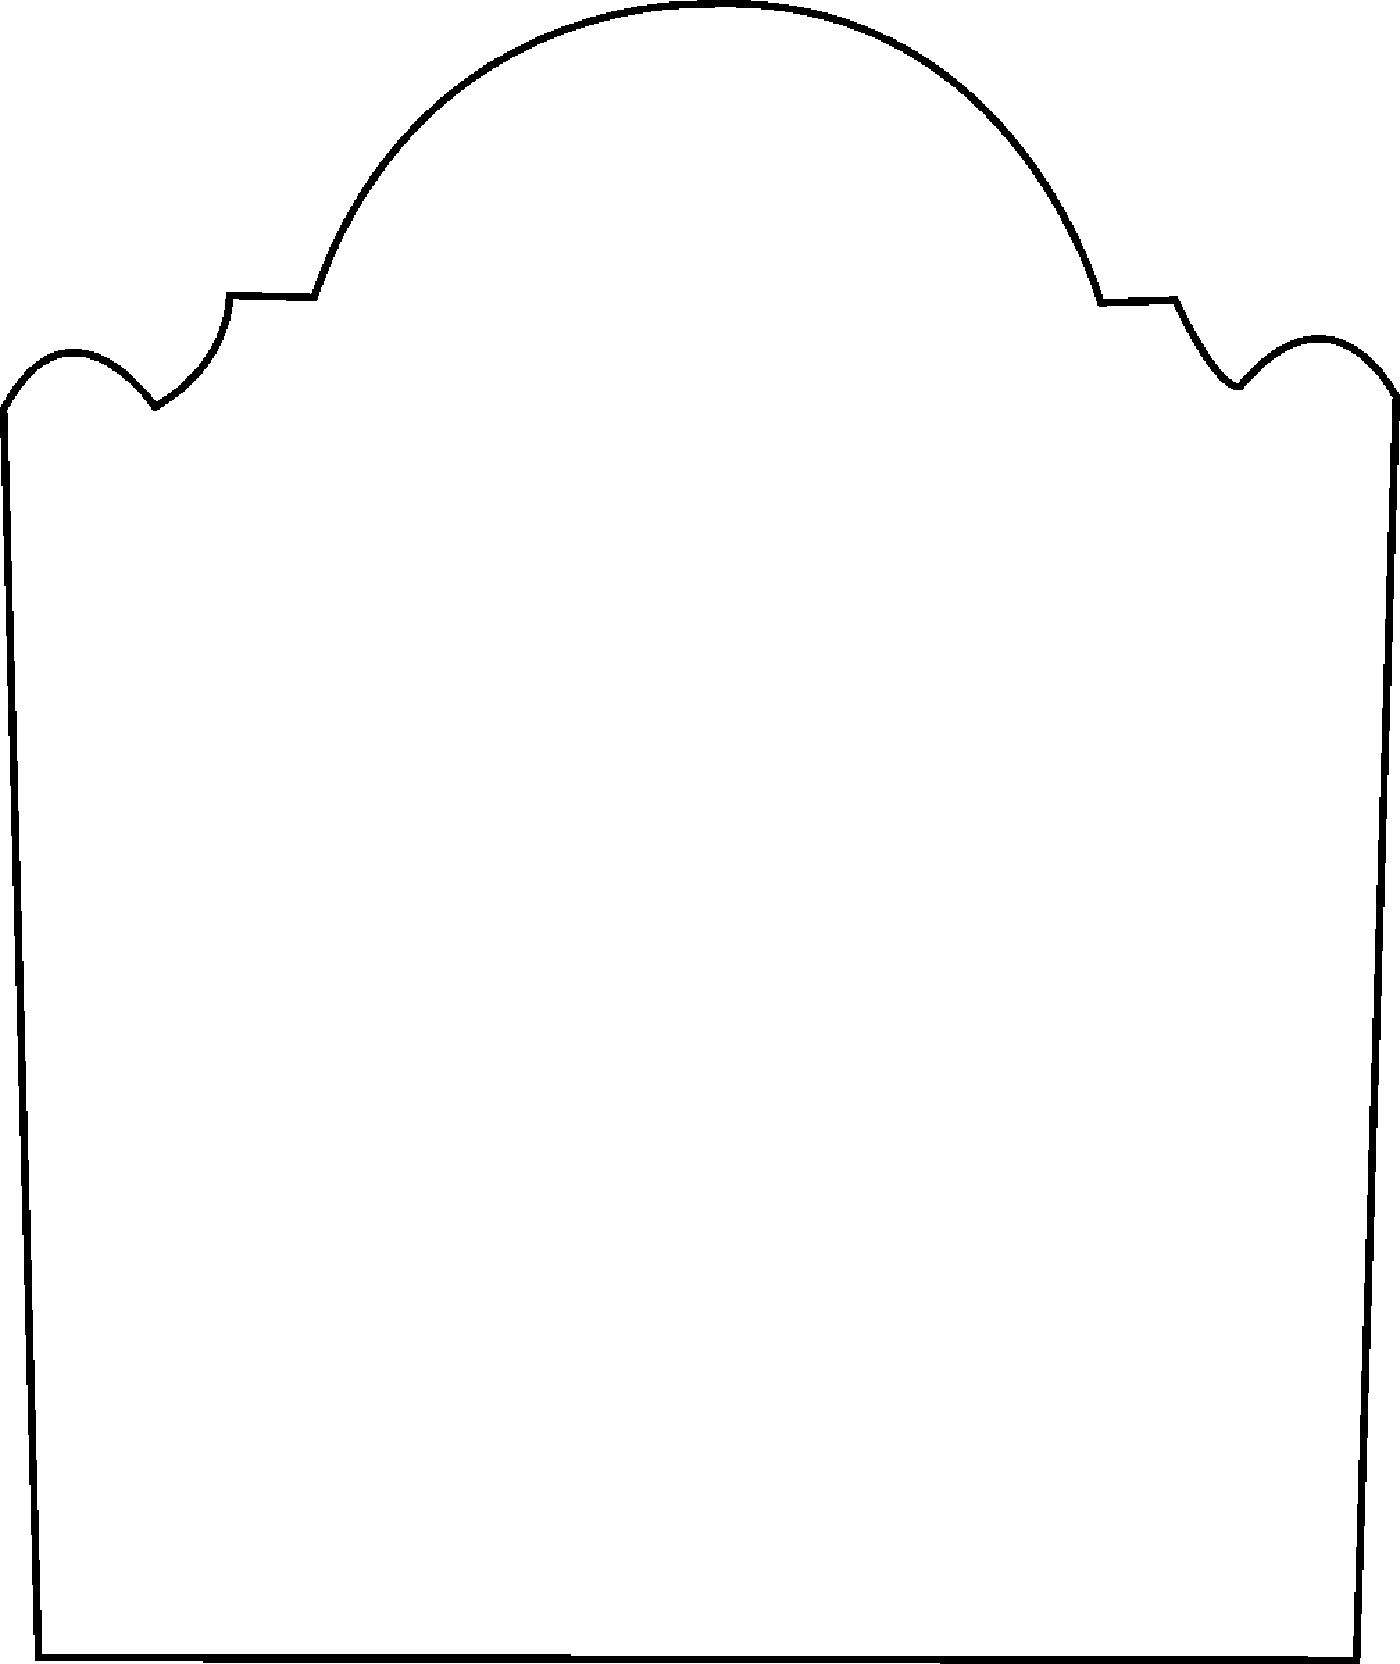 Tombstone Templates - ClipArt Best - ClipArt Best